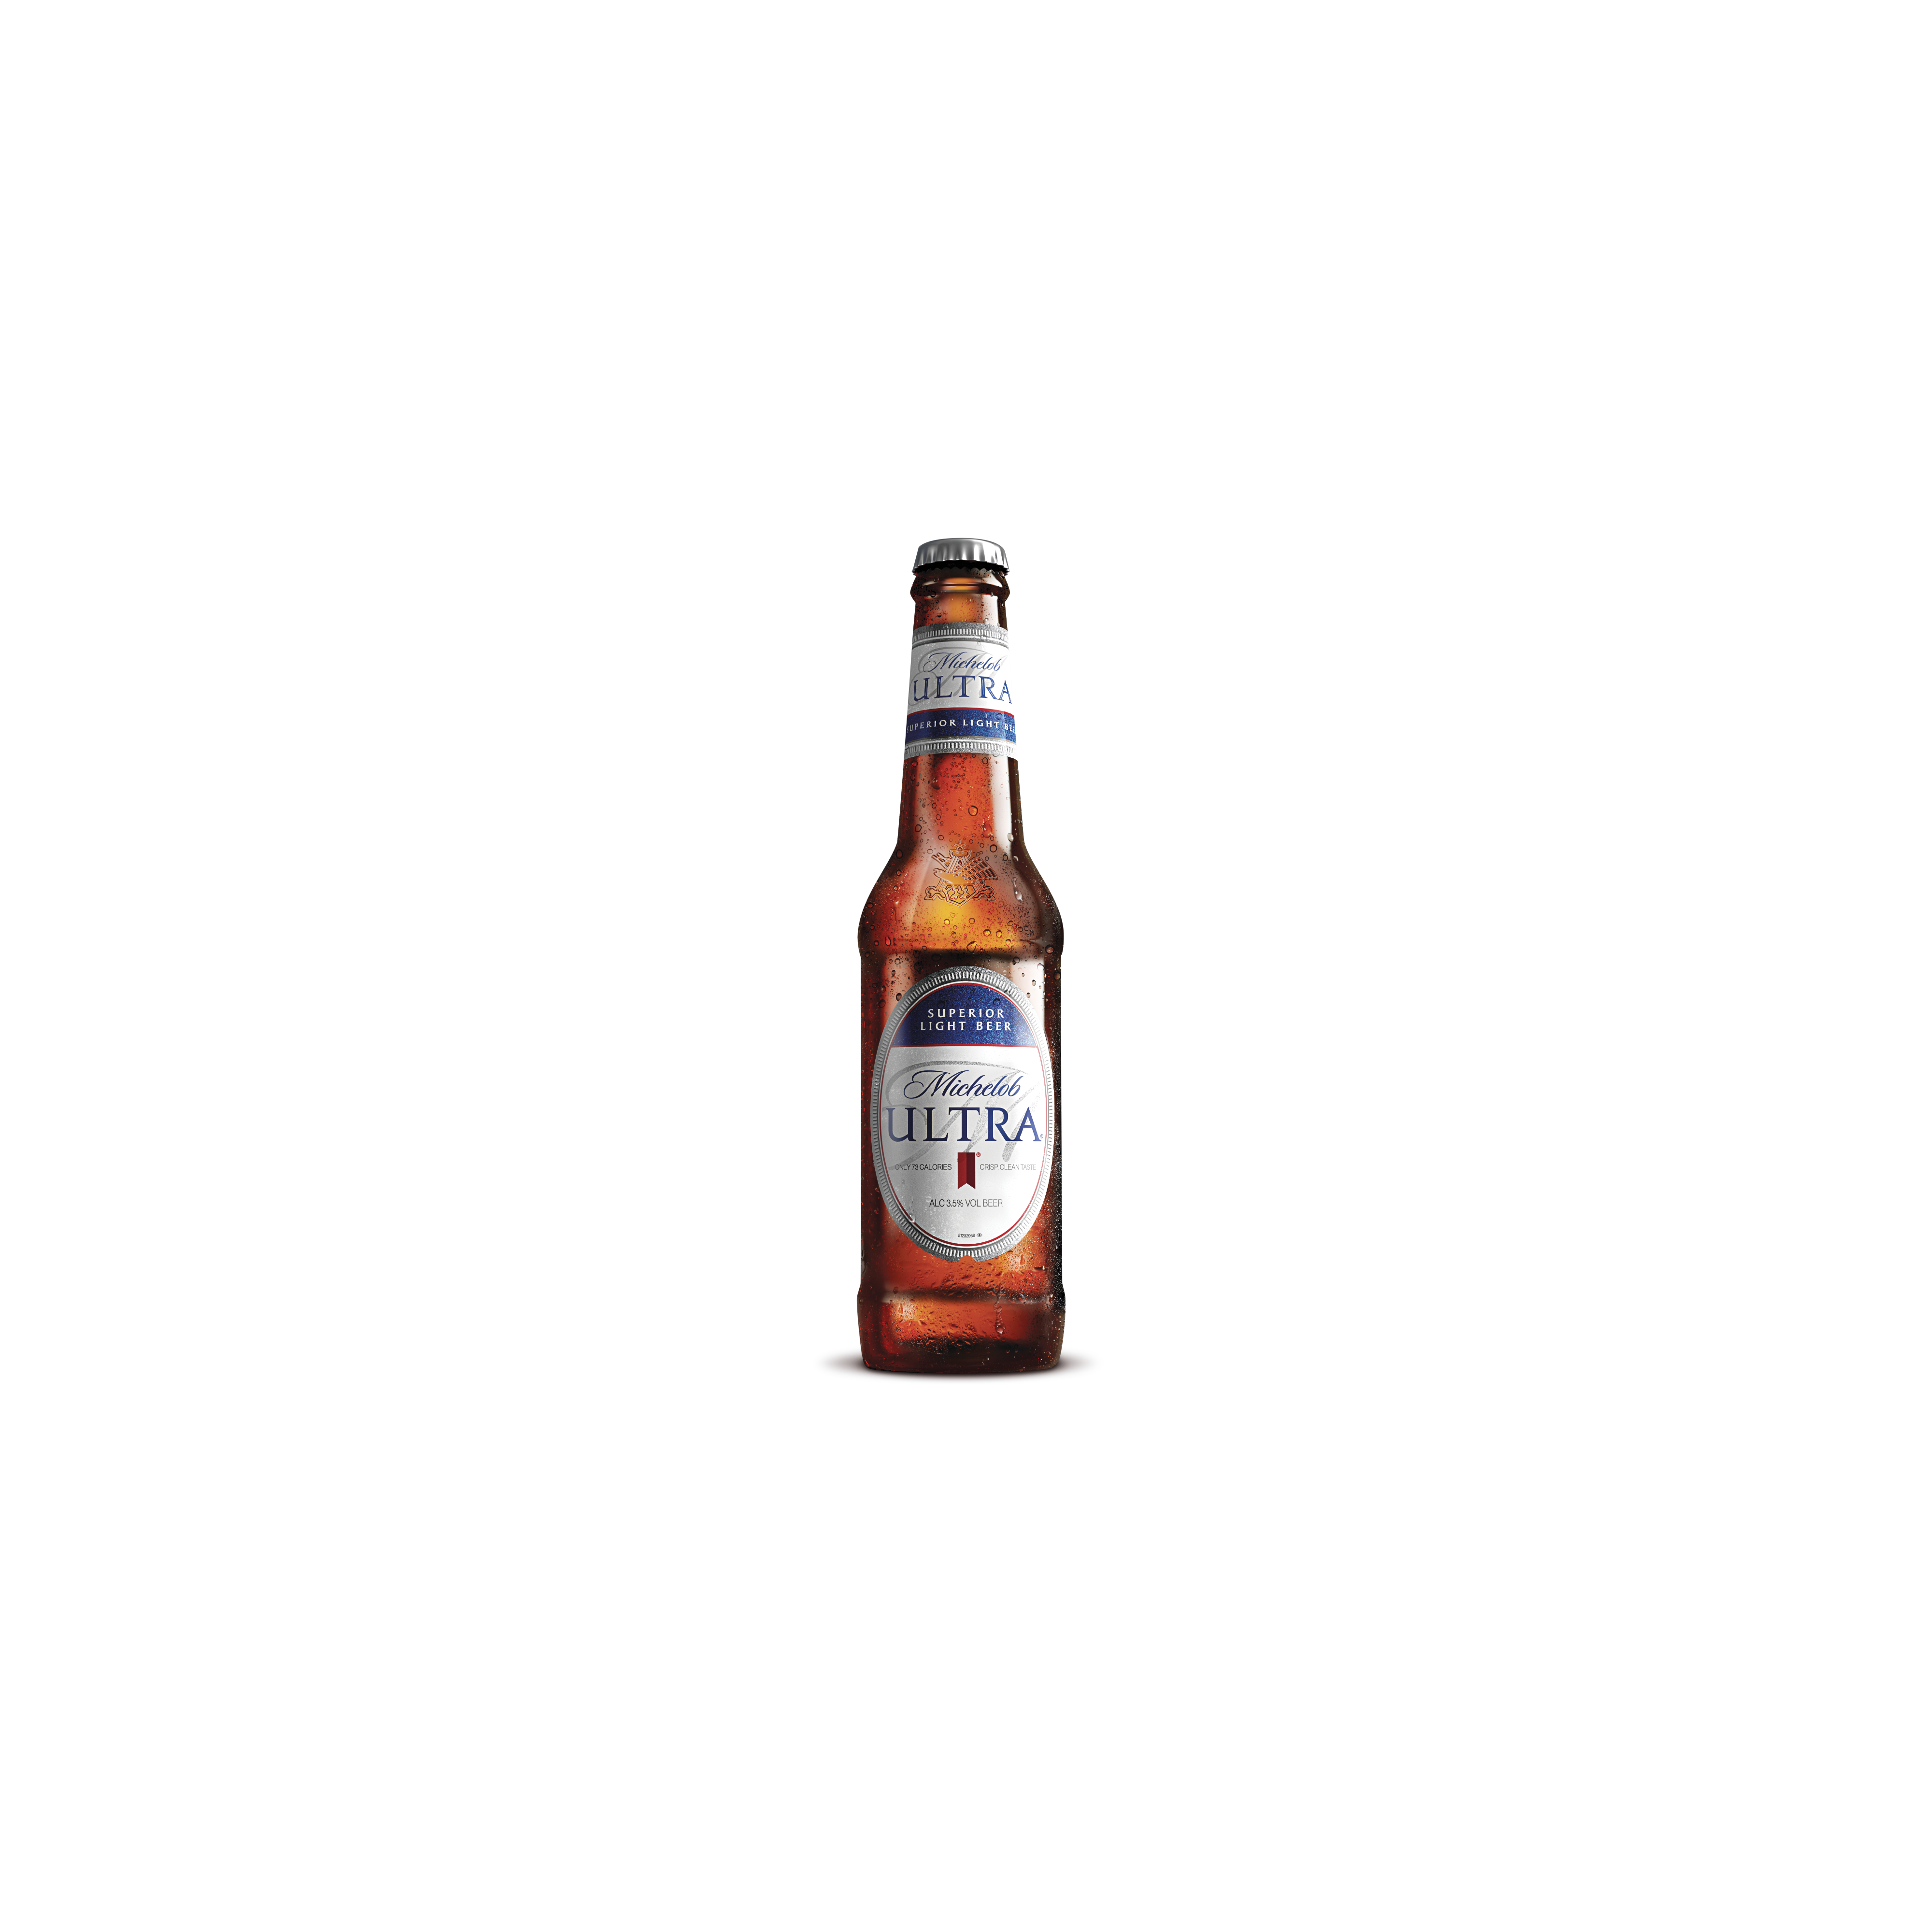 michelob-ultra-launches-new-bottle-format